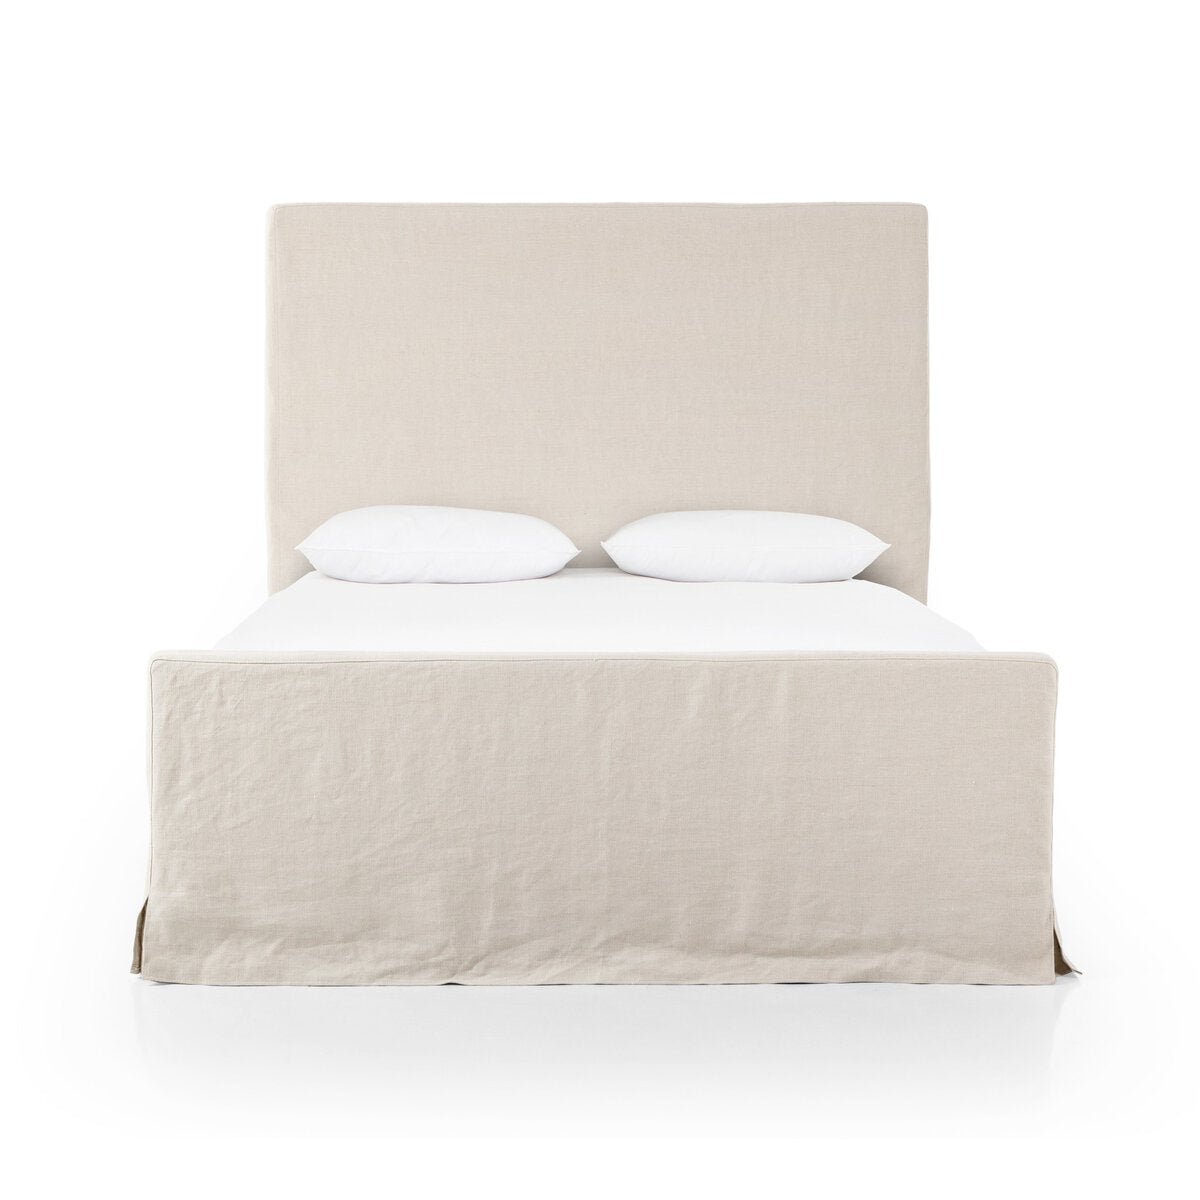 DAPHNE SLIPCOVER BED